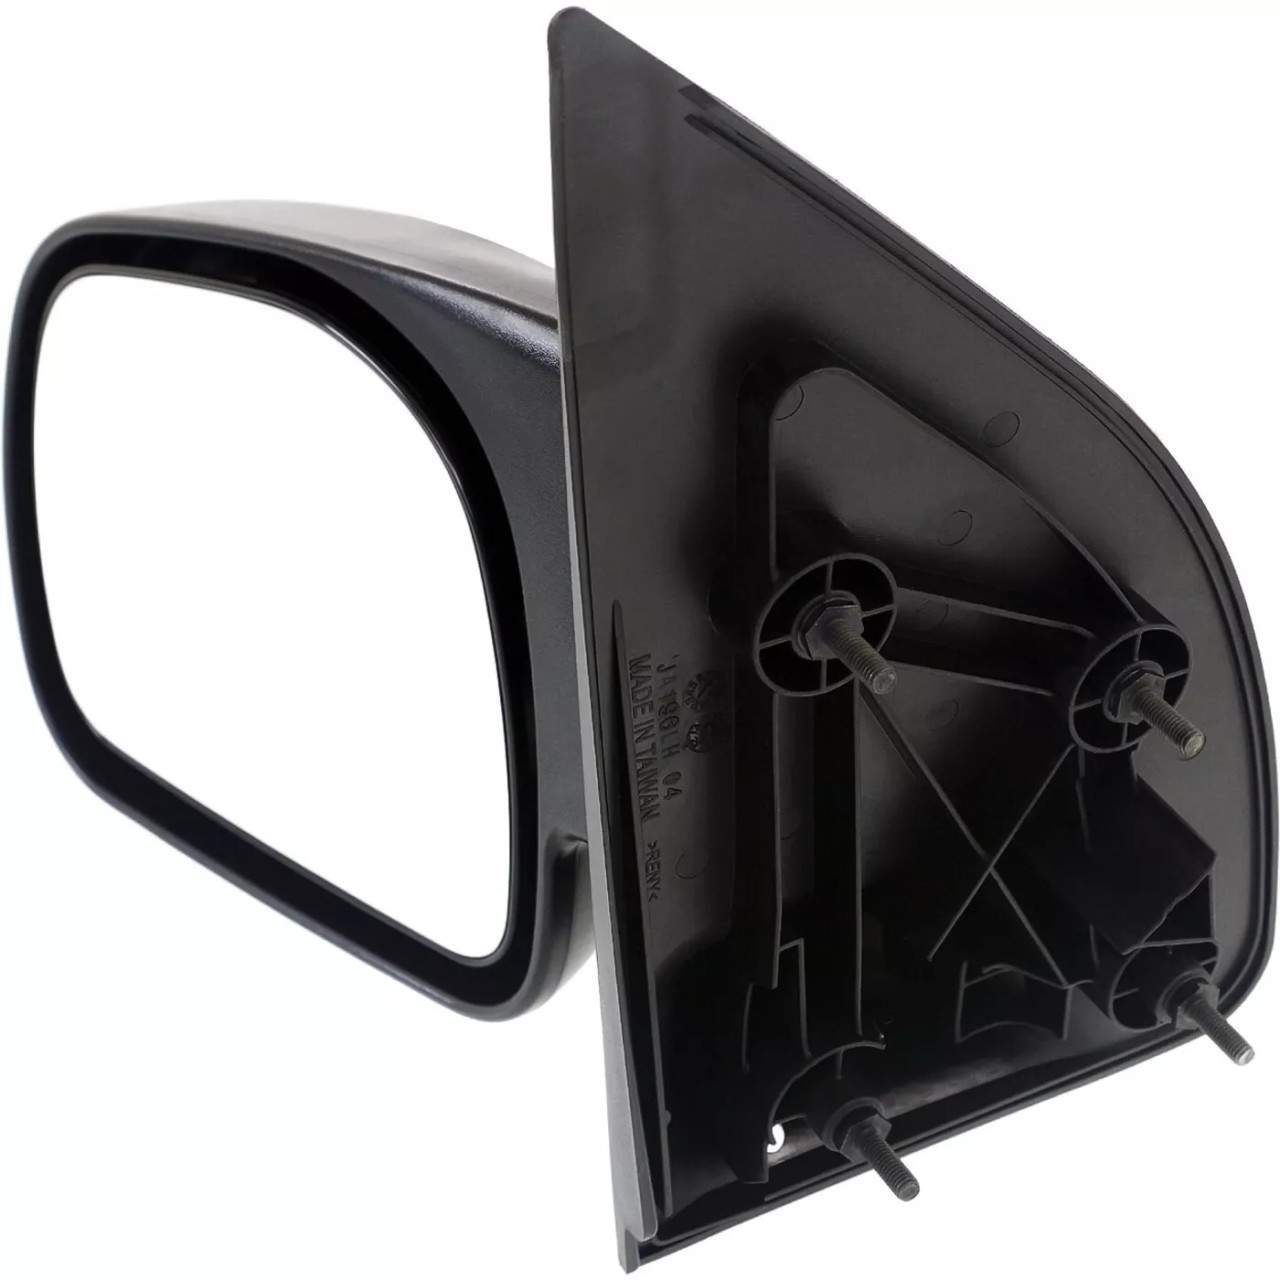 Mirrors  Driver Left Side for F350 Truck F450 F550 F250 Ford F-350 Super Duty